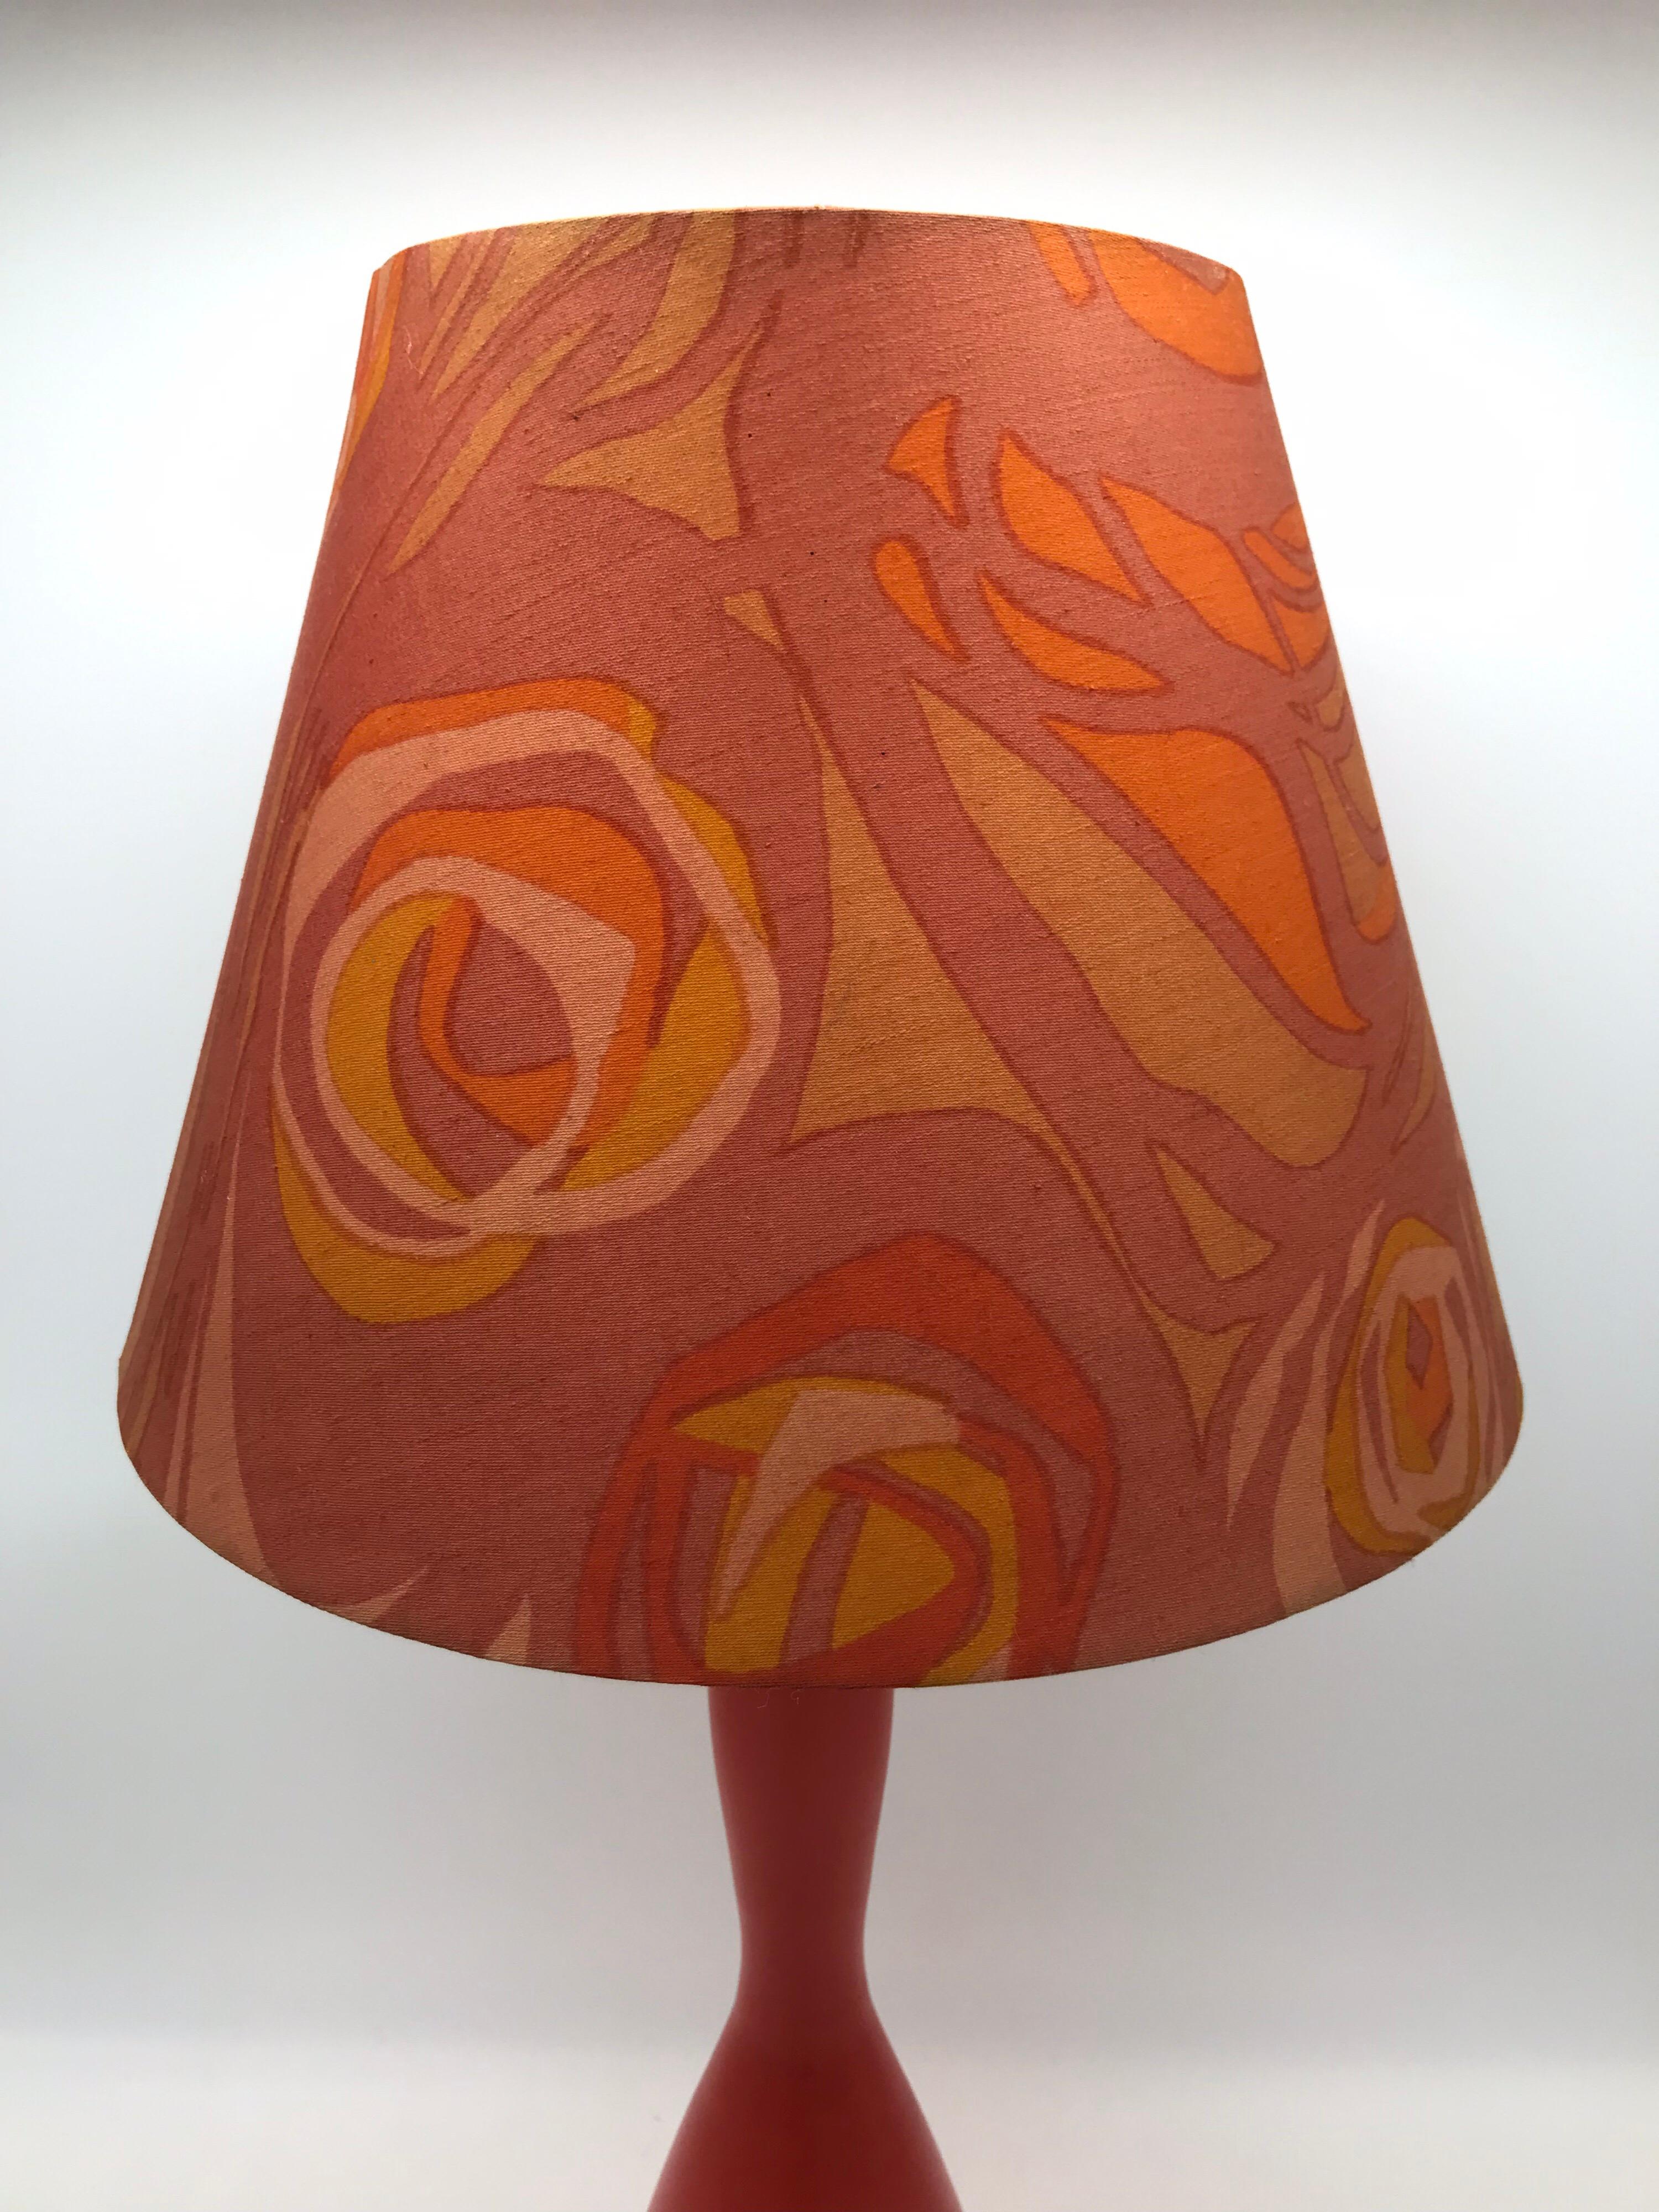 Danish Stunning Retro Vintage Table Lamp from the 1960s Made by Kastrup Glass Denmark